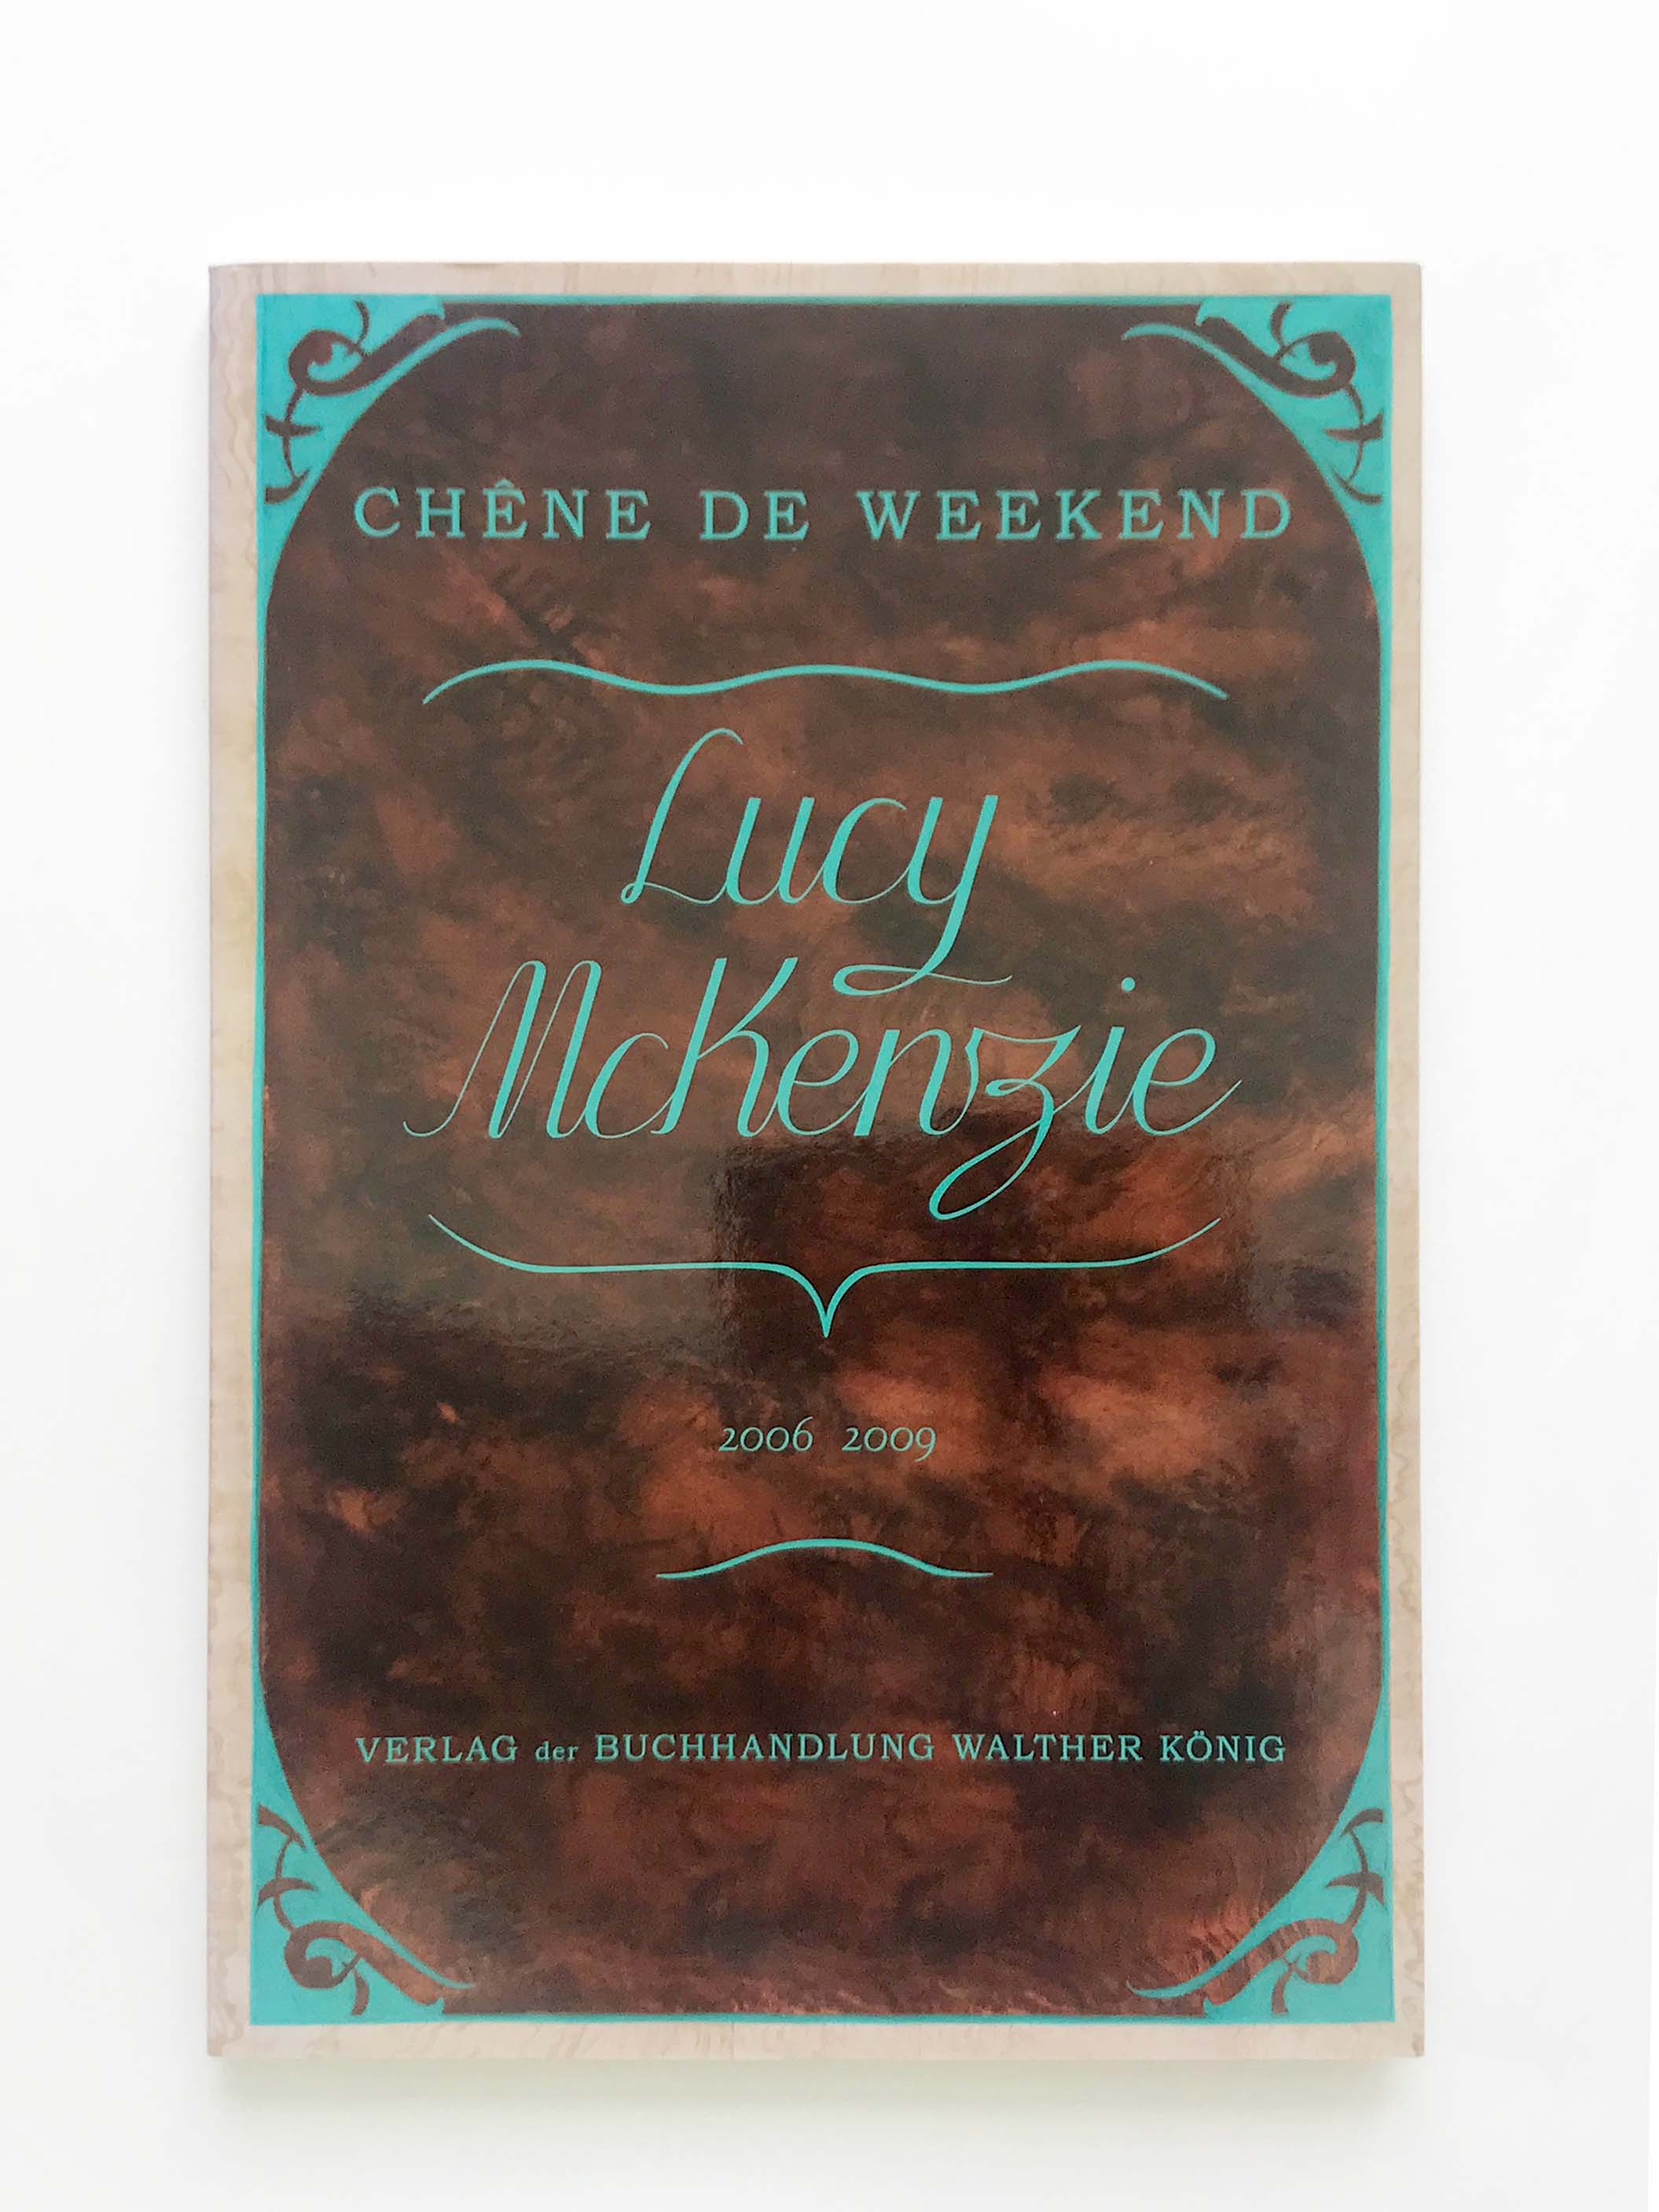 Lucy McKenzie's book, brown cover with teal decoration